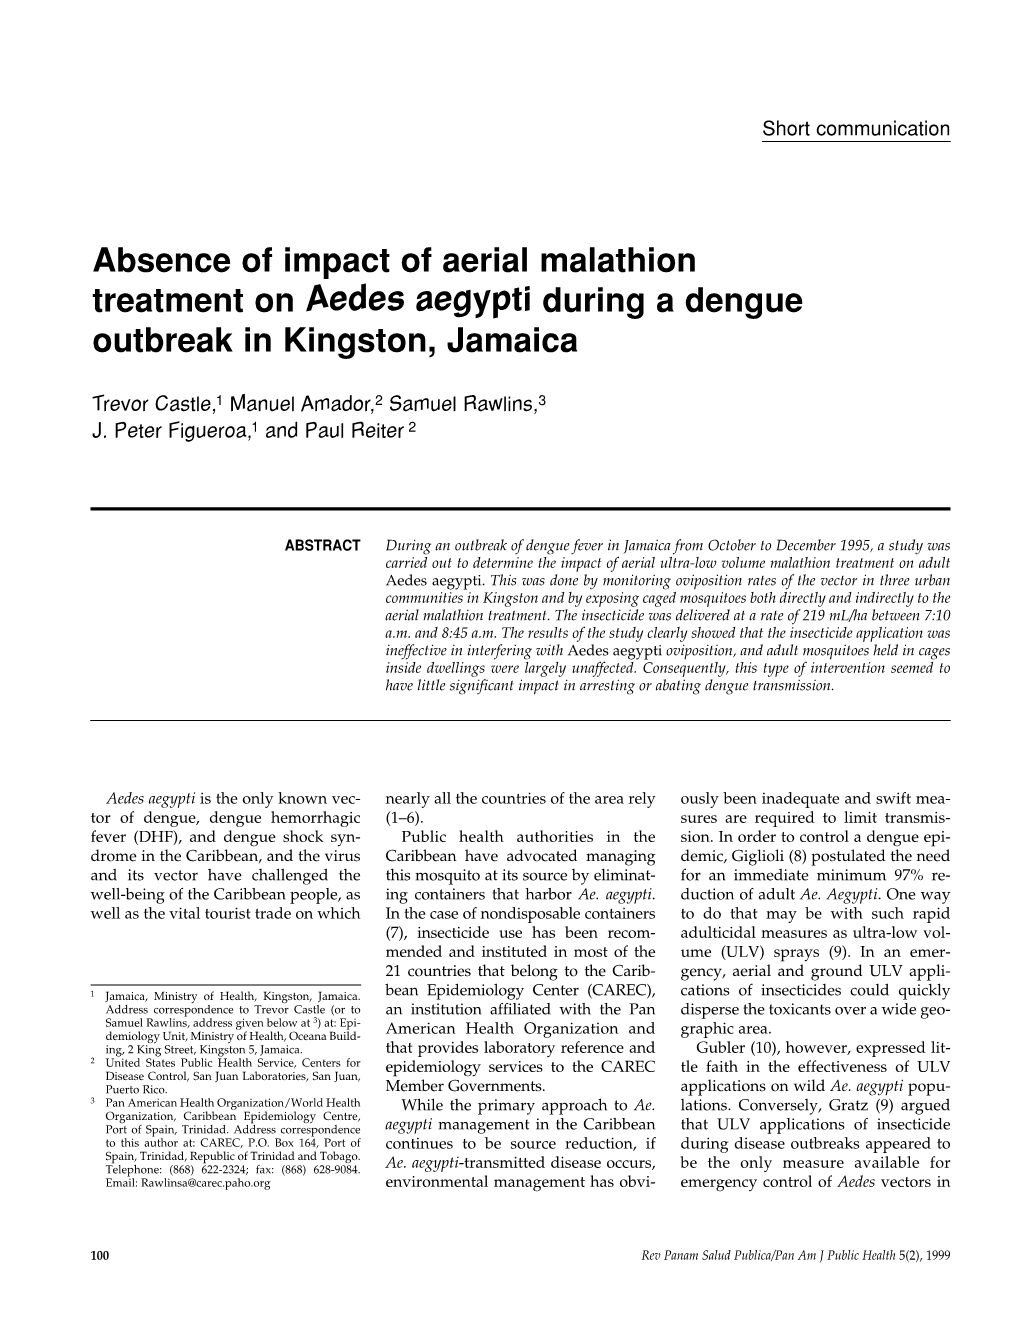 Absence of Impact of Aerial Malathion Treatment on Aedes Aegypti During a Dengue Outbreak in Kingston, Jamaica